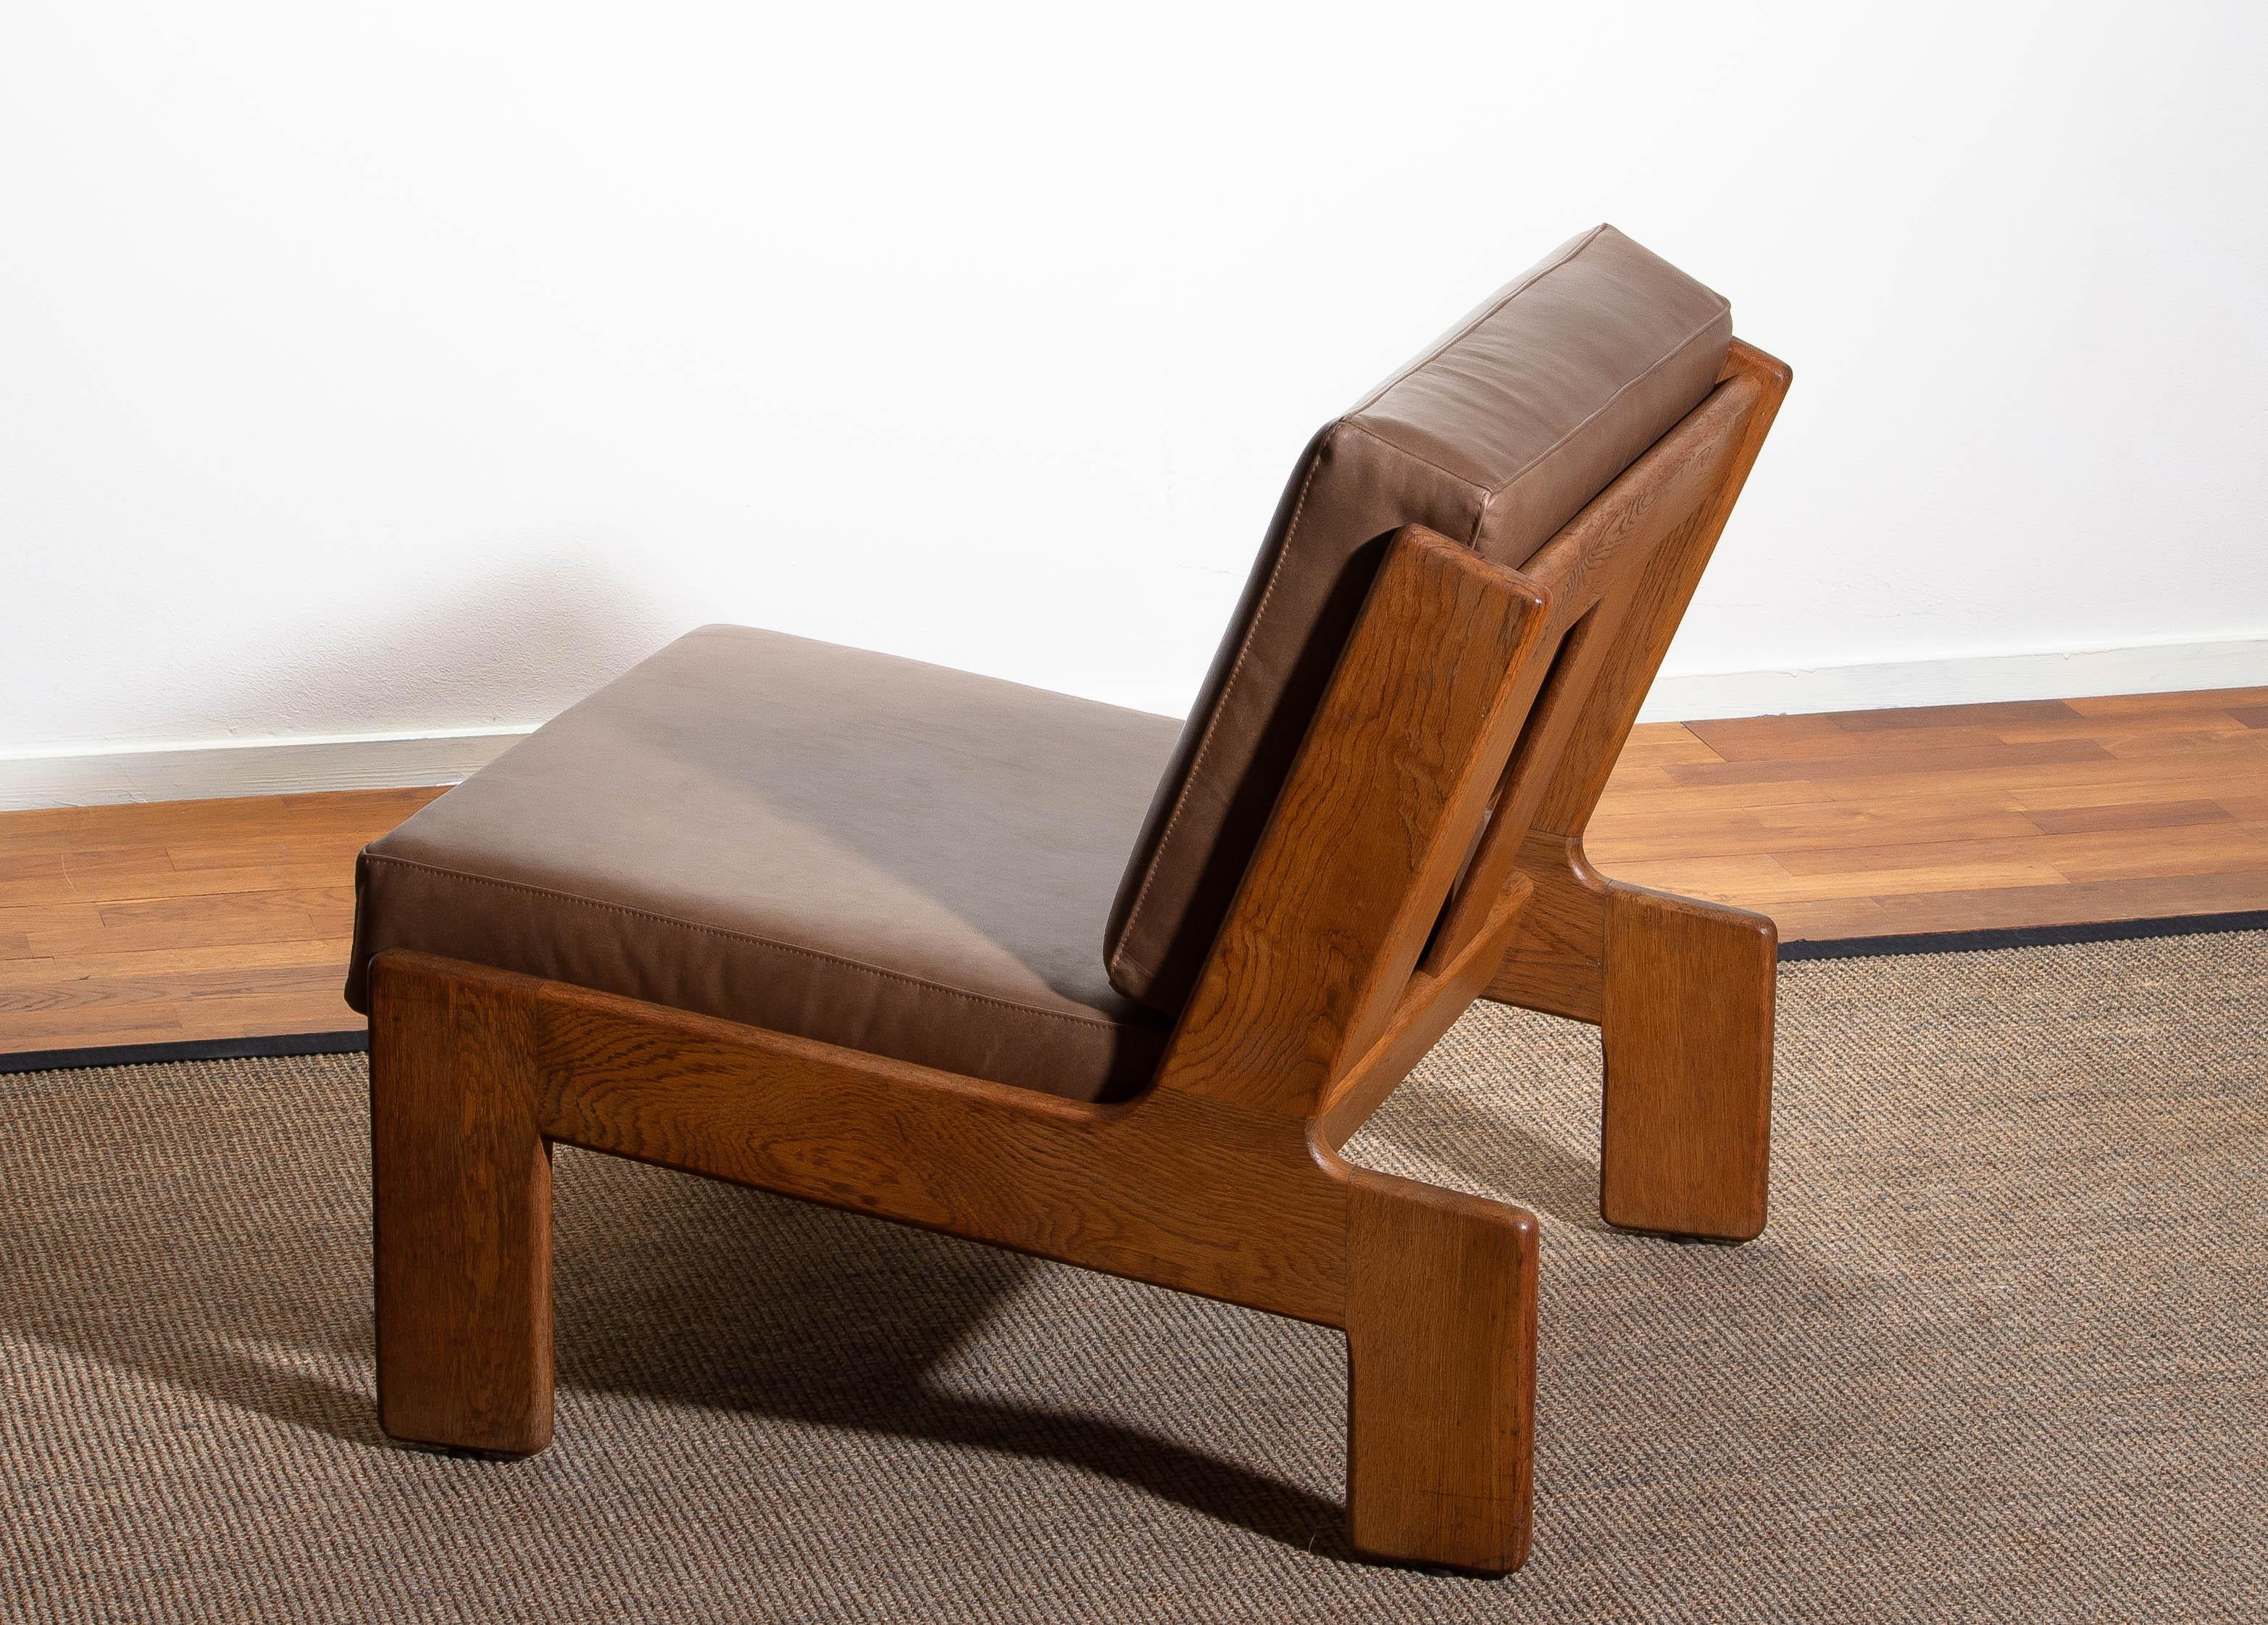 1960s, Oak and Leather Cubist Lounge Chair by Esko Pajamies for Asko, Finland 1